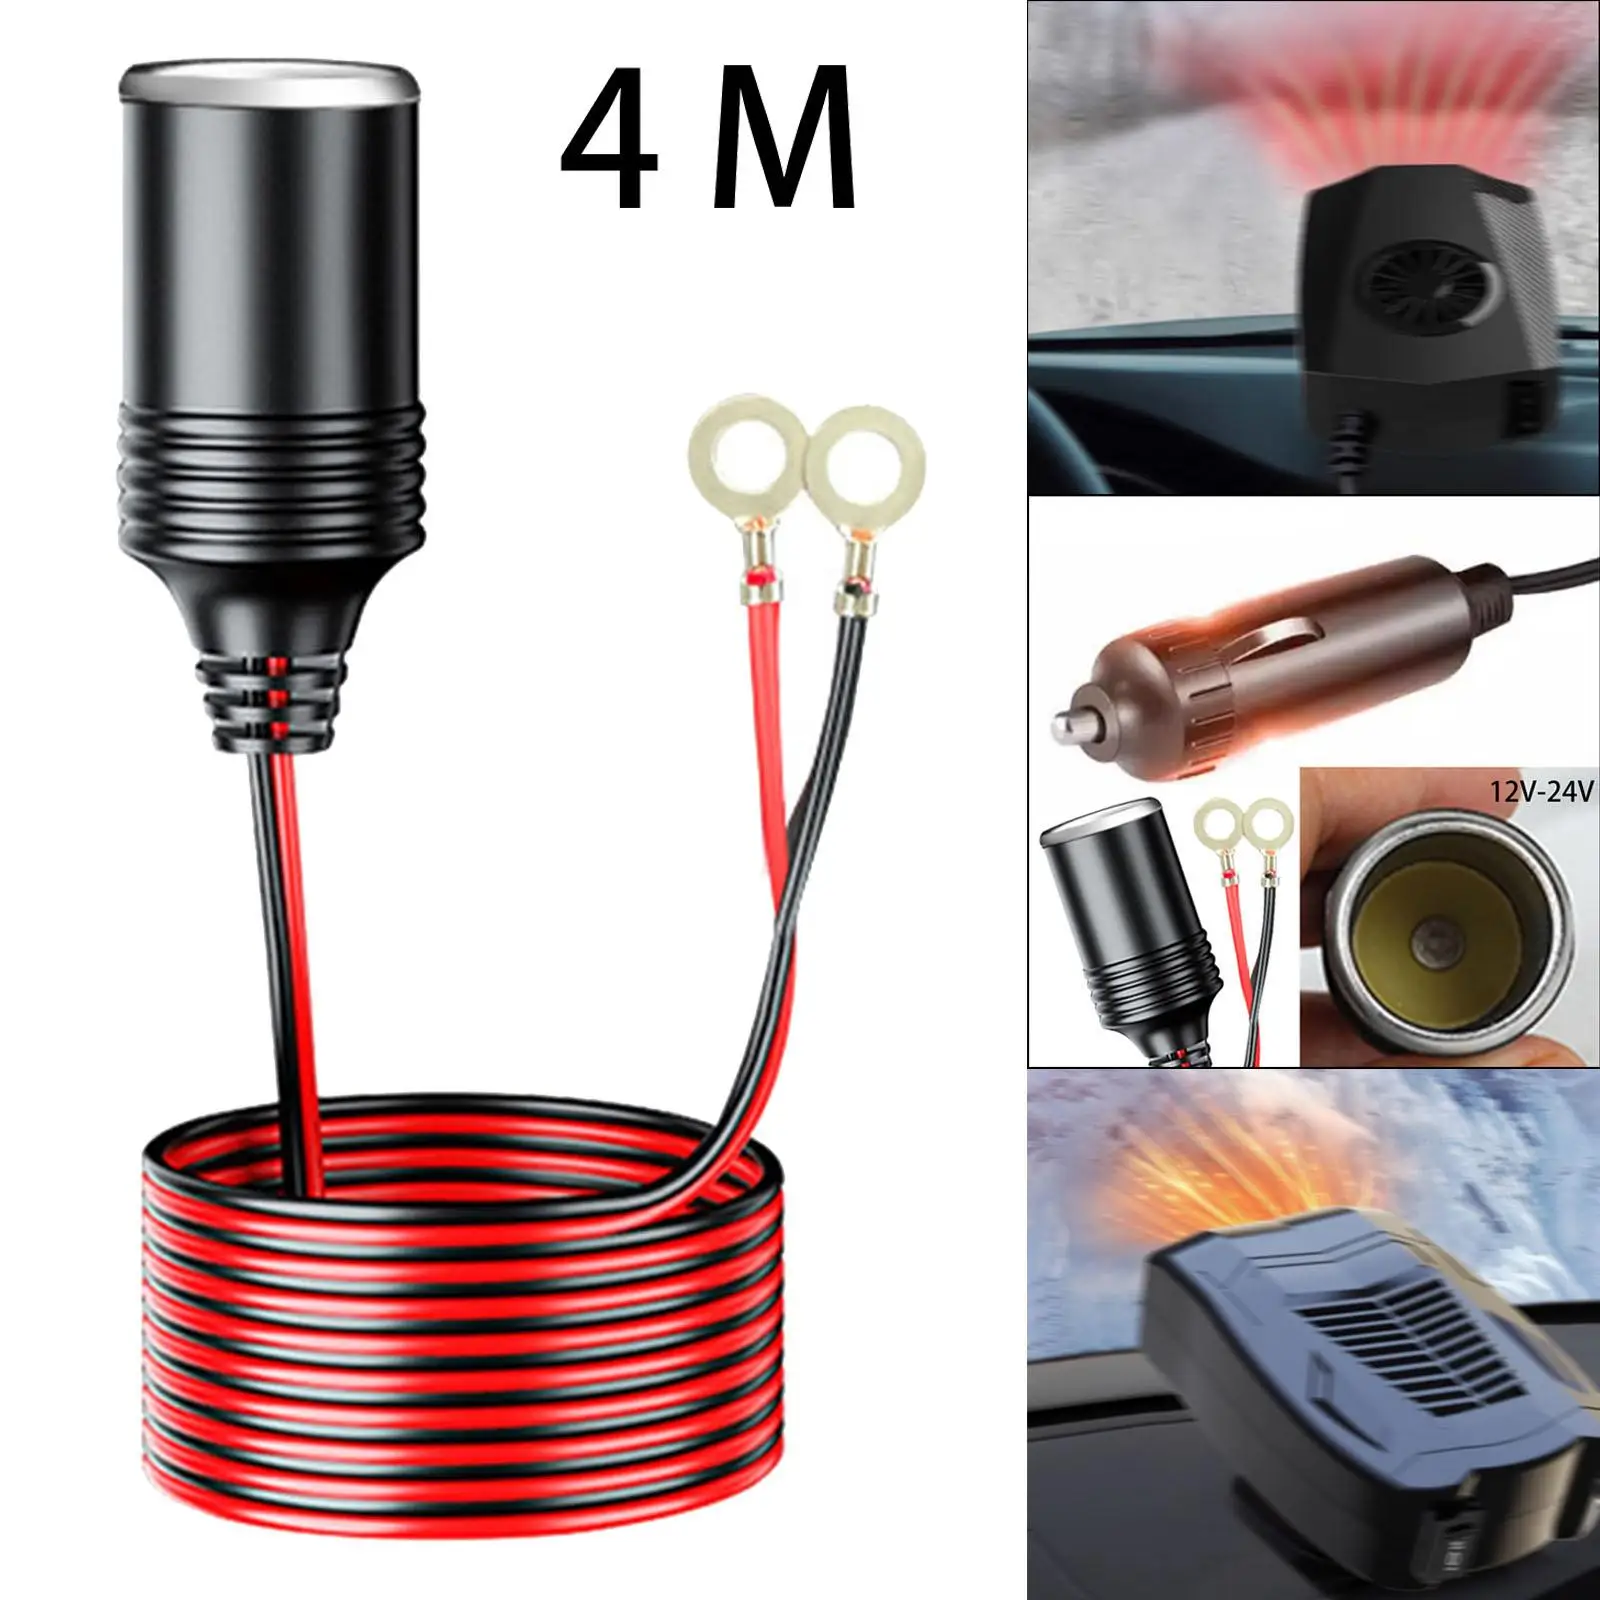 Cigarette Lighter Adapter Power Supply Cord Accessories Replaces Female Plug